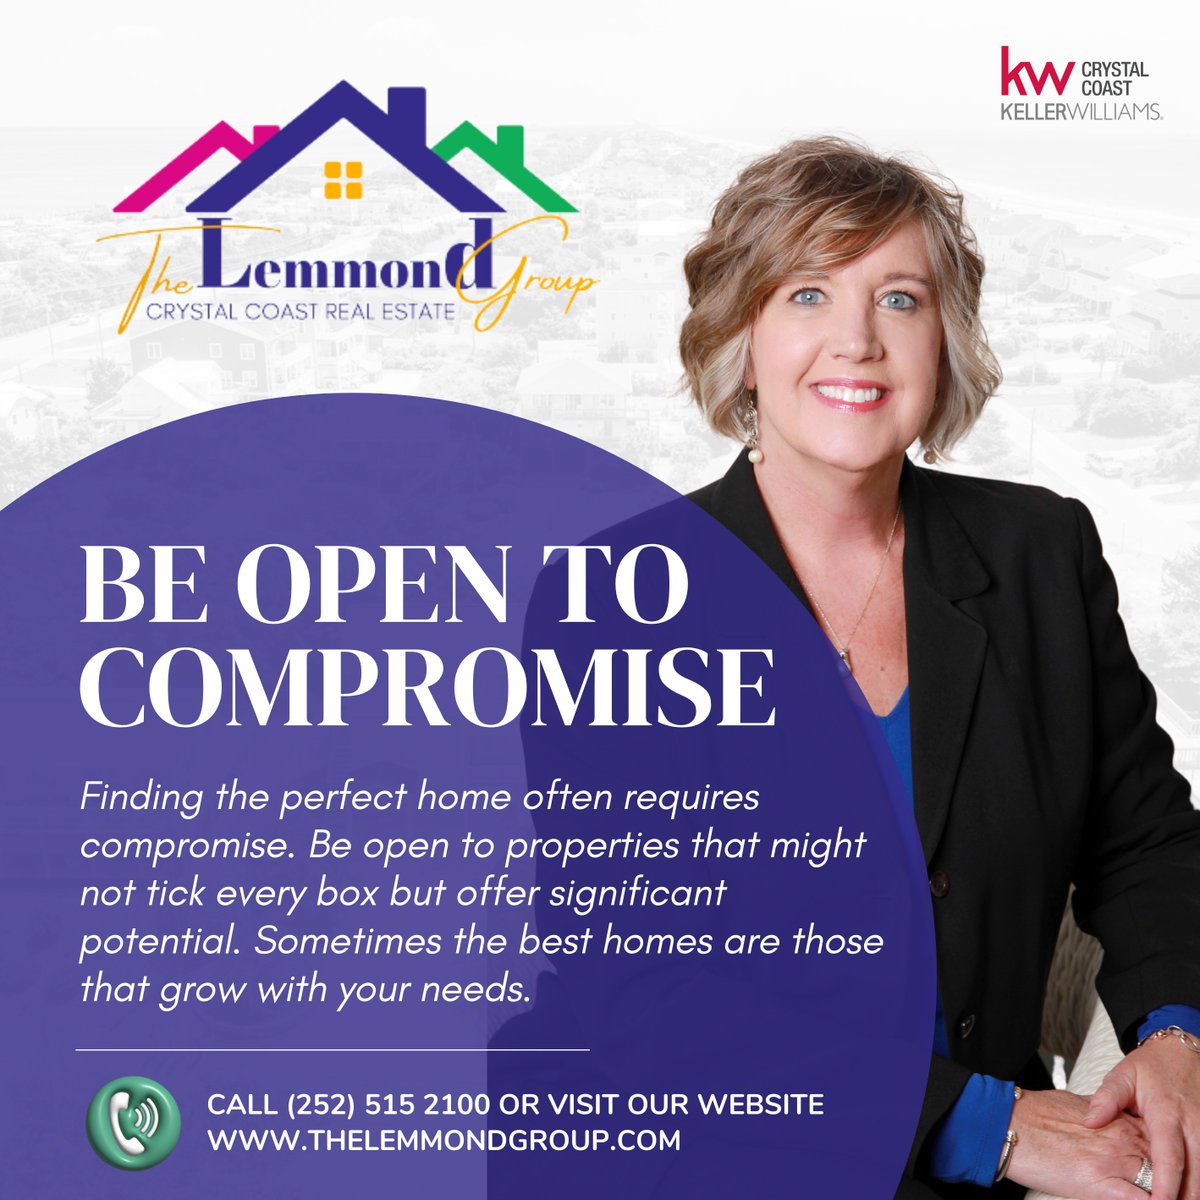 🏡 #𝐖𝐞𝐝𝐧𝐞𝐬𝐝𝐚𝐲𝐓𝐢𝐩𝐬! Buying a home is a significant decision that often involves balancing numerous preferences and practicalities. Being open to compromise can make this process smoother and more successful. 
#homebuying #realestateinvestment #beachliving #kwcc